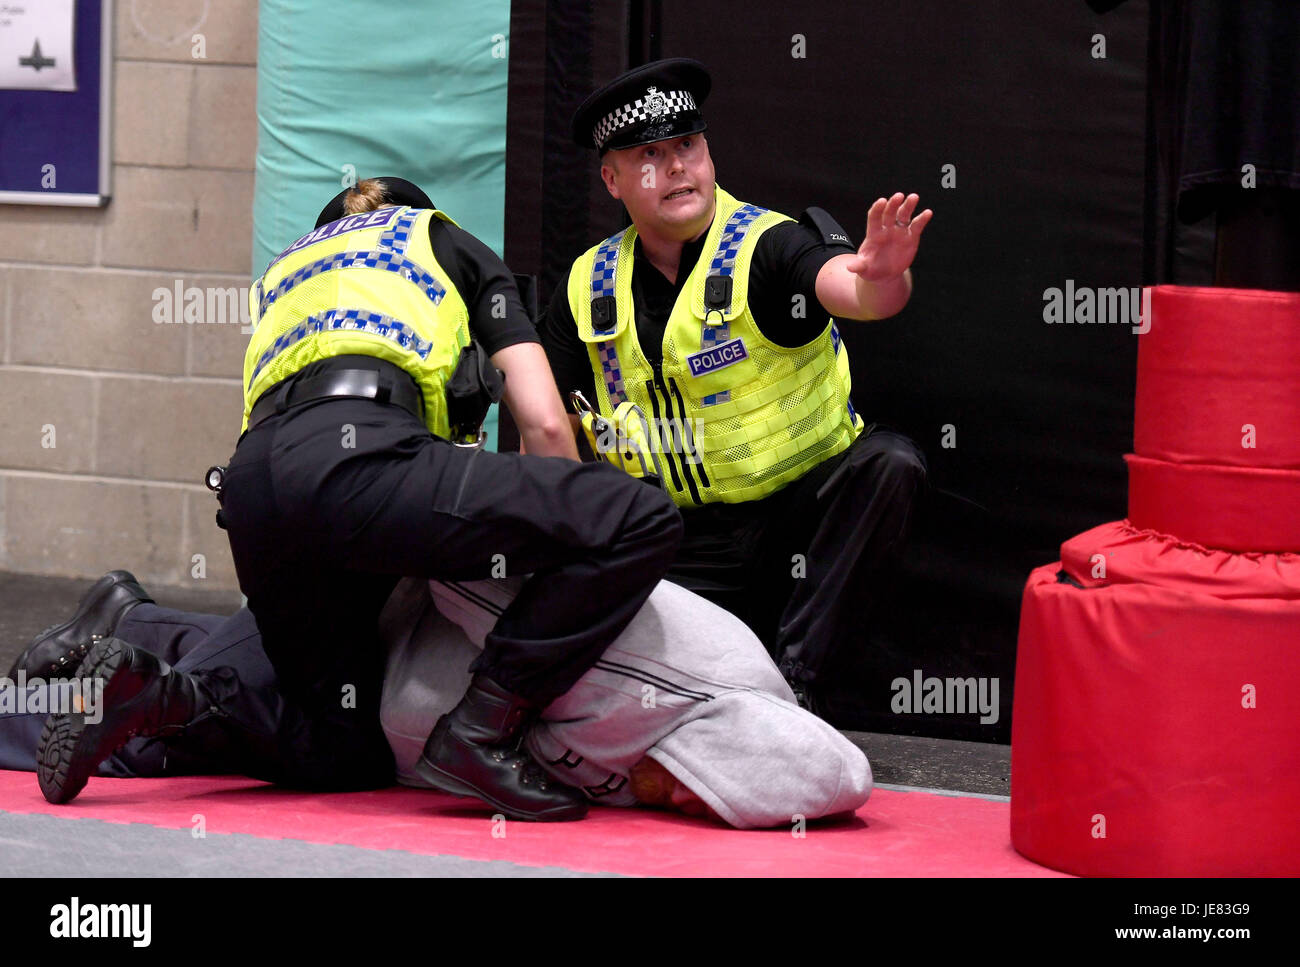 Police demonstrate an arrest during training. The focus of the event is to demonstrate the transparency around Dorset Police's use of force and the challenges involved, along with an overview of equipment and the skills that improve public and officer safety.  This comes ahead of the publication of use of force data by individual police forces nationally at the end of July. Credit: Finnbarr Webster/Alamy Live News Stock Photo